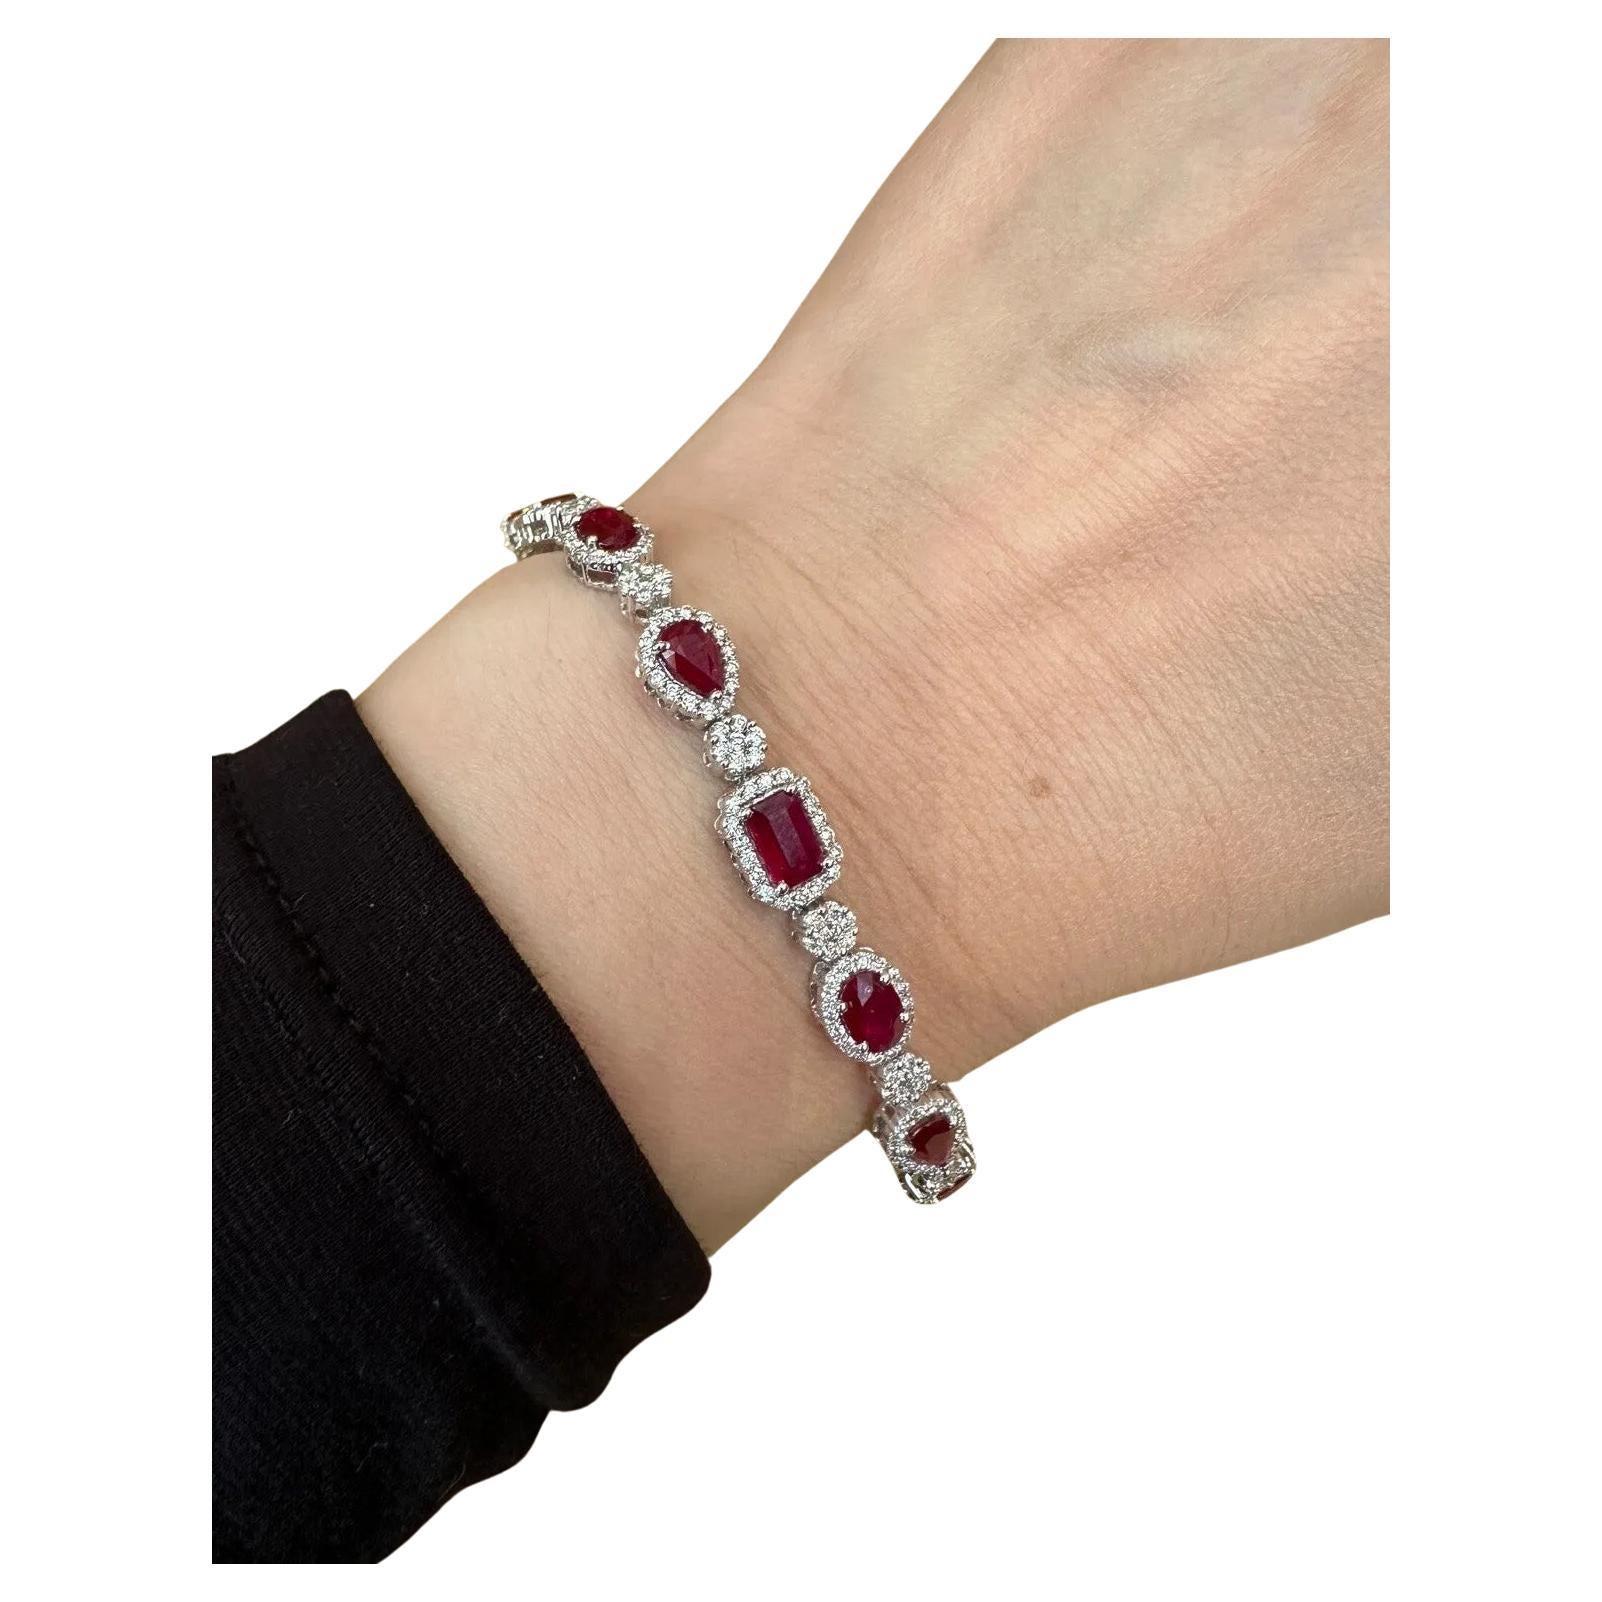 Ruby and Diamond Link Bracelet 7.65 Carats Total Weight in 18k White Gold